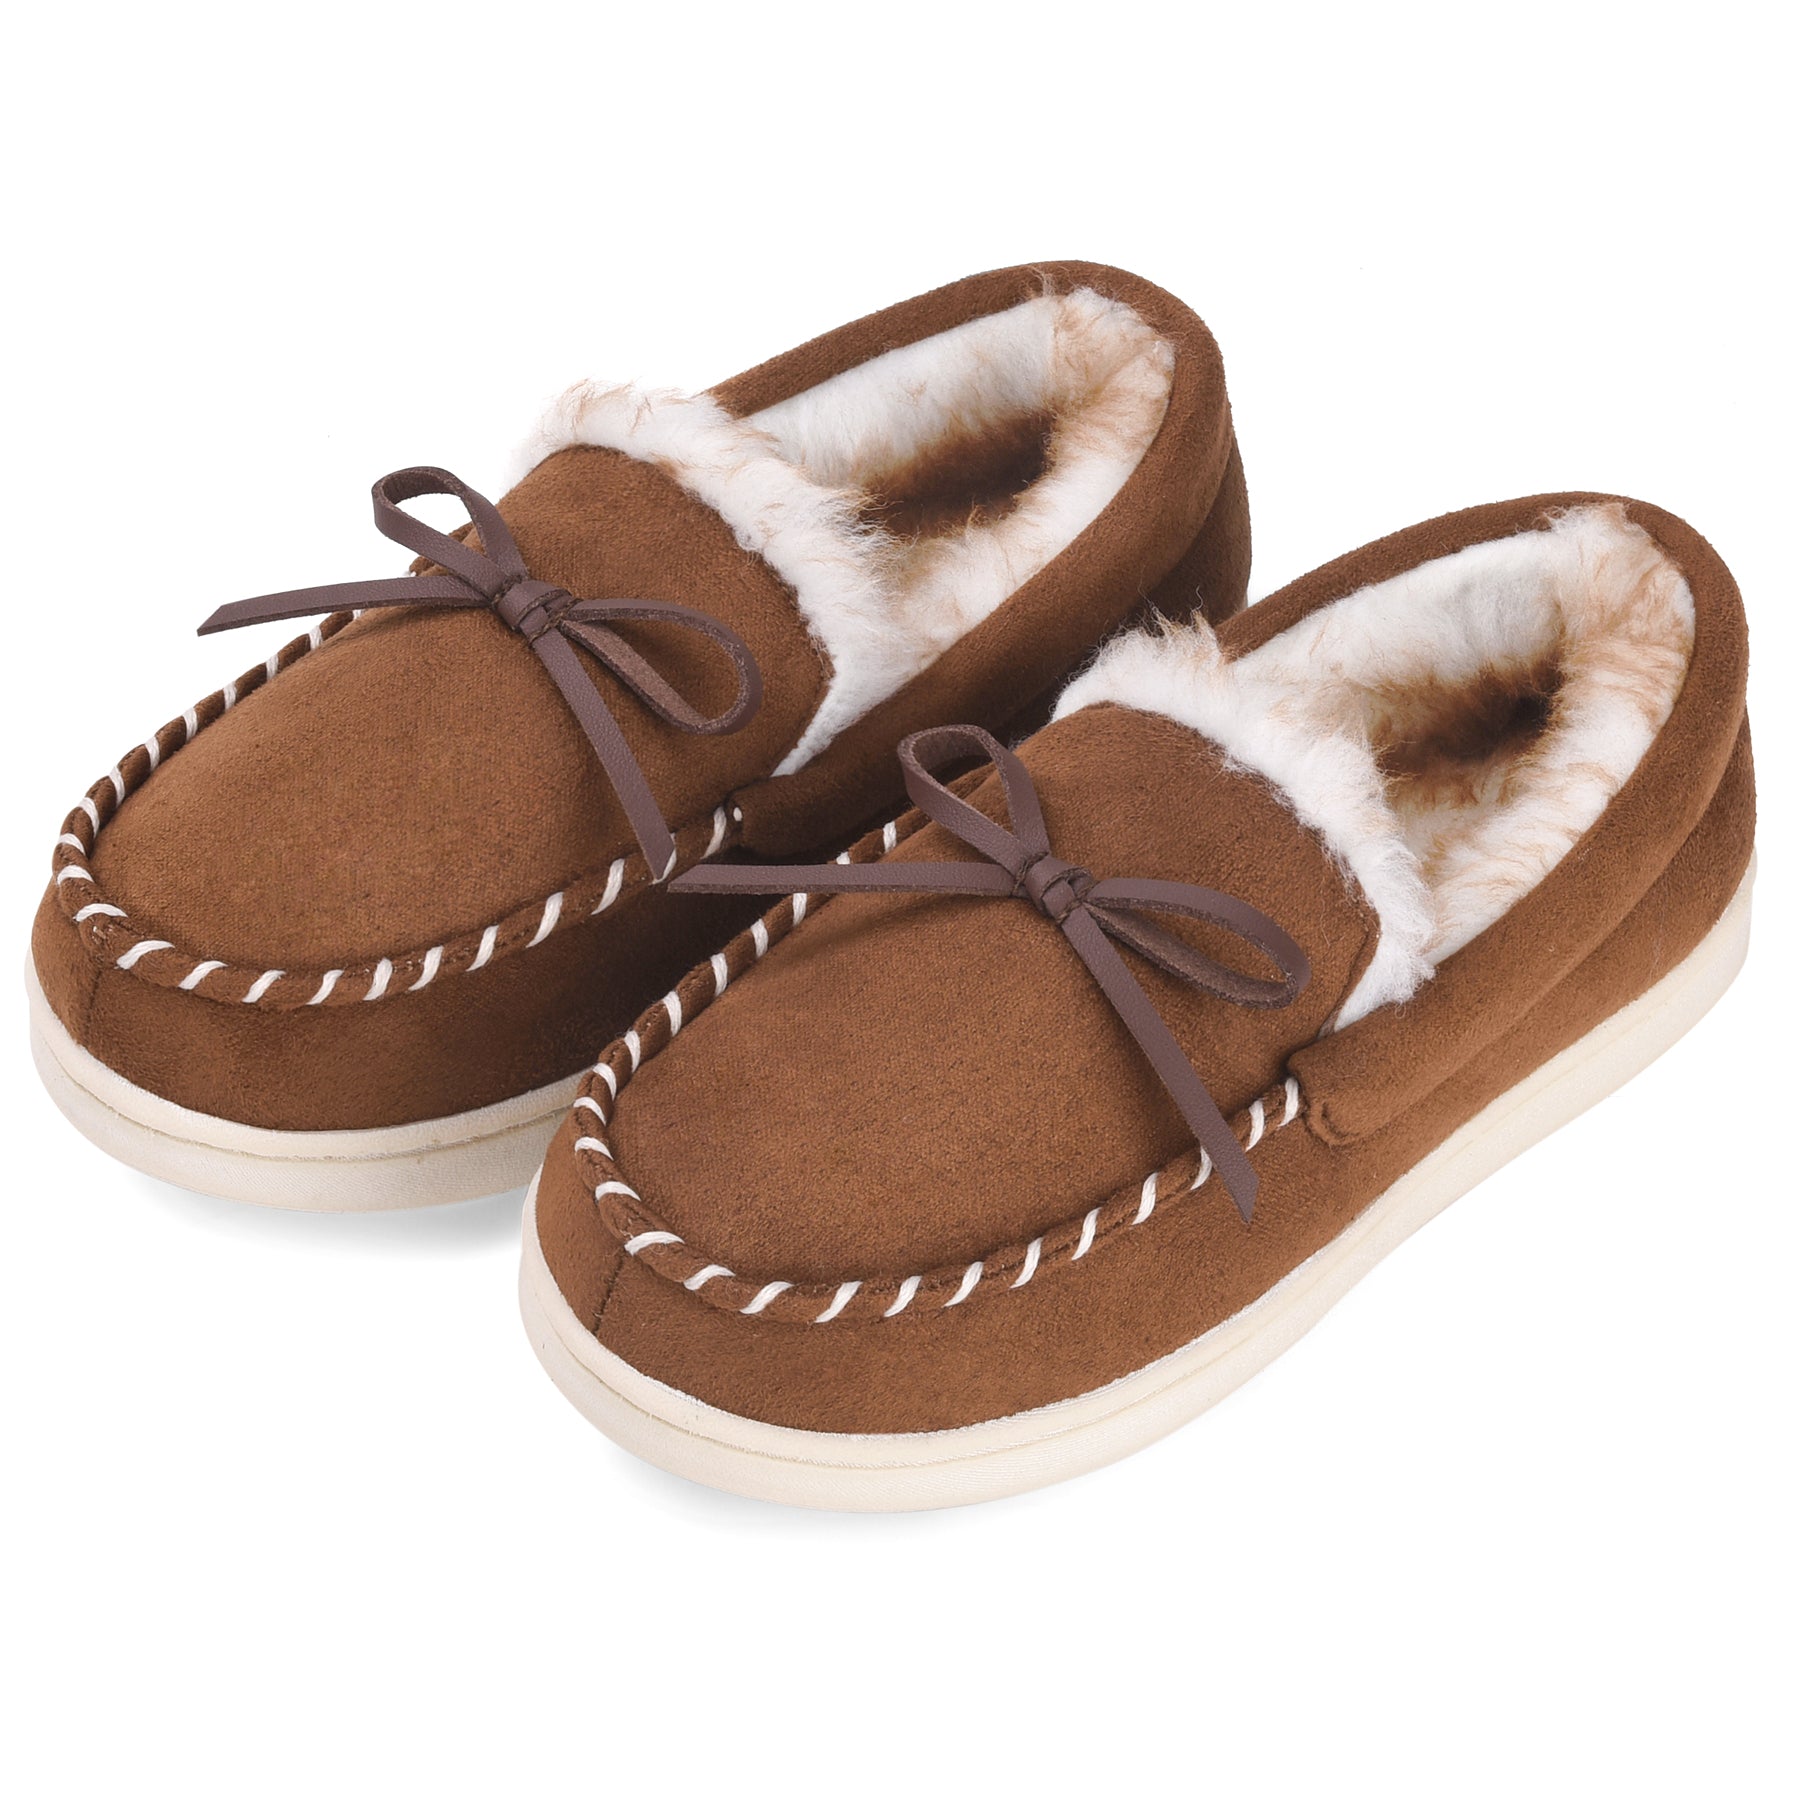 Cat & Jack Boys' Toddler Moccasin Slippers Sizes 5 6 9 10 or 12 Gray A5023  | eBay